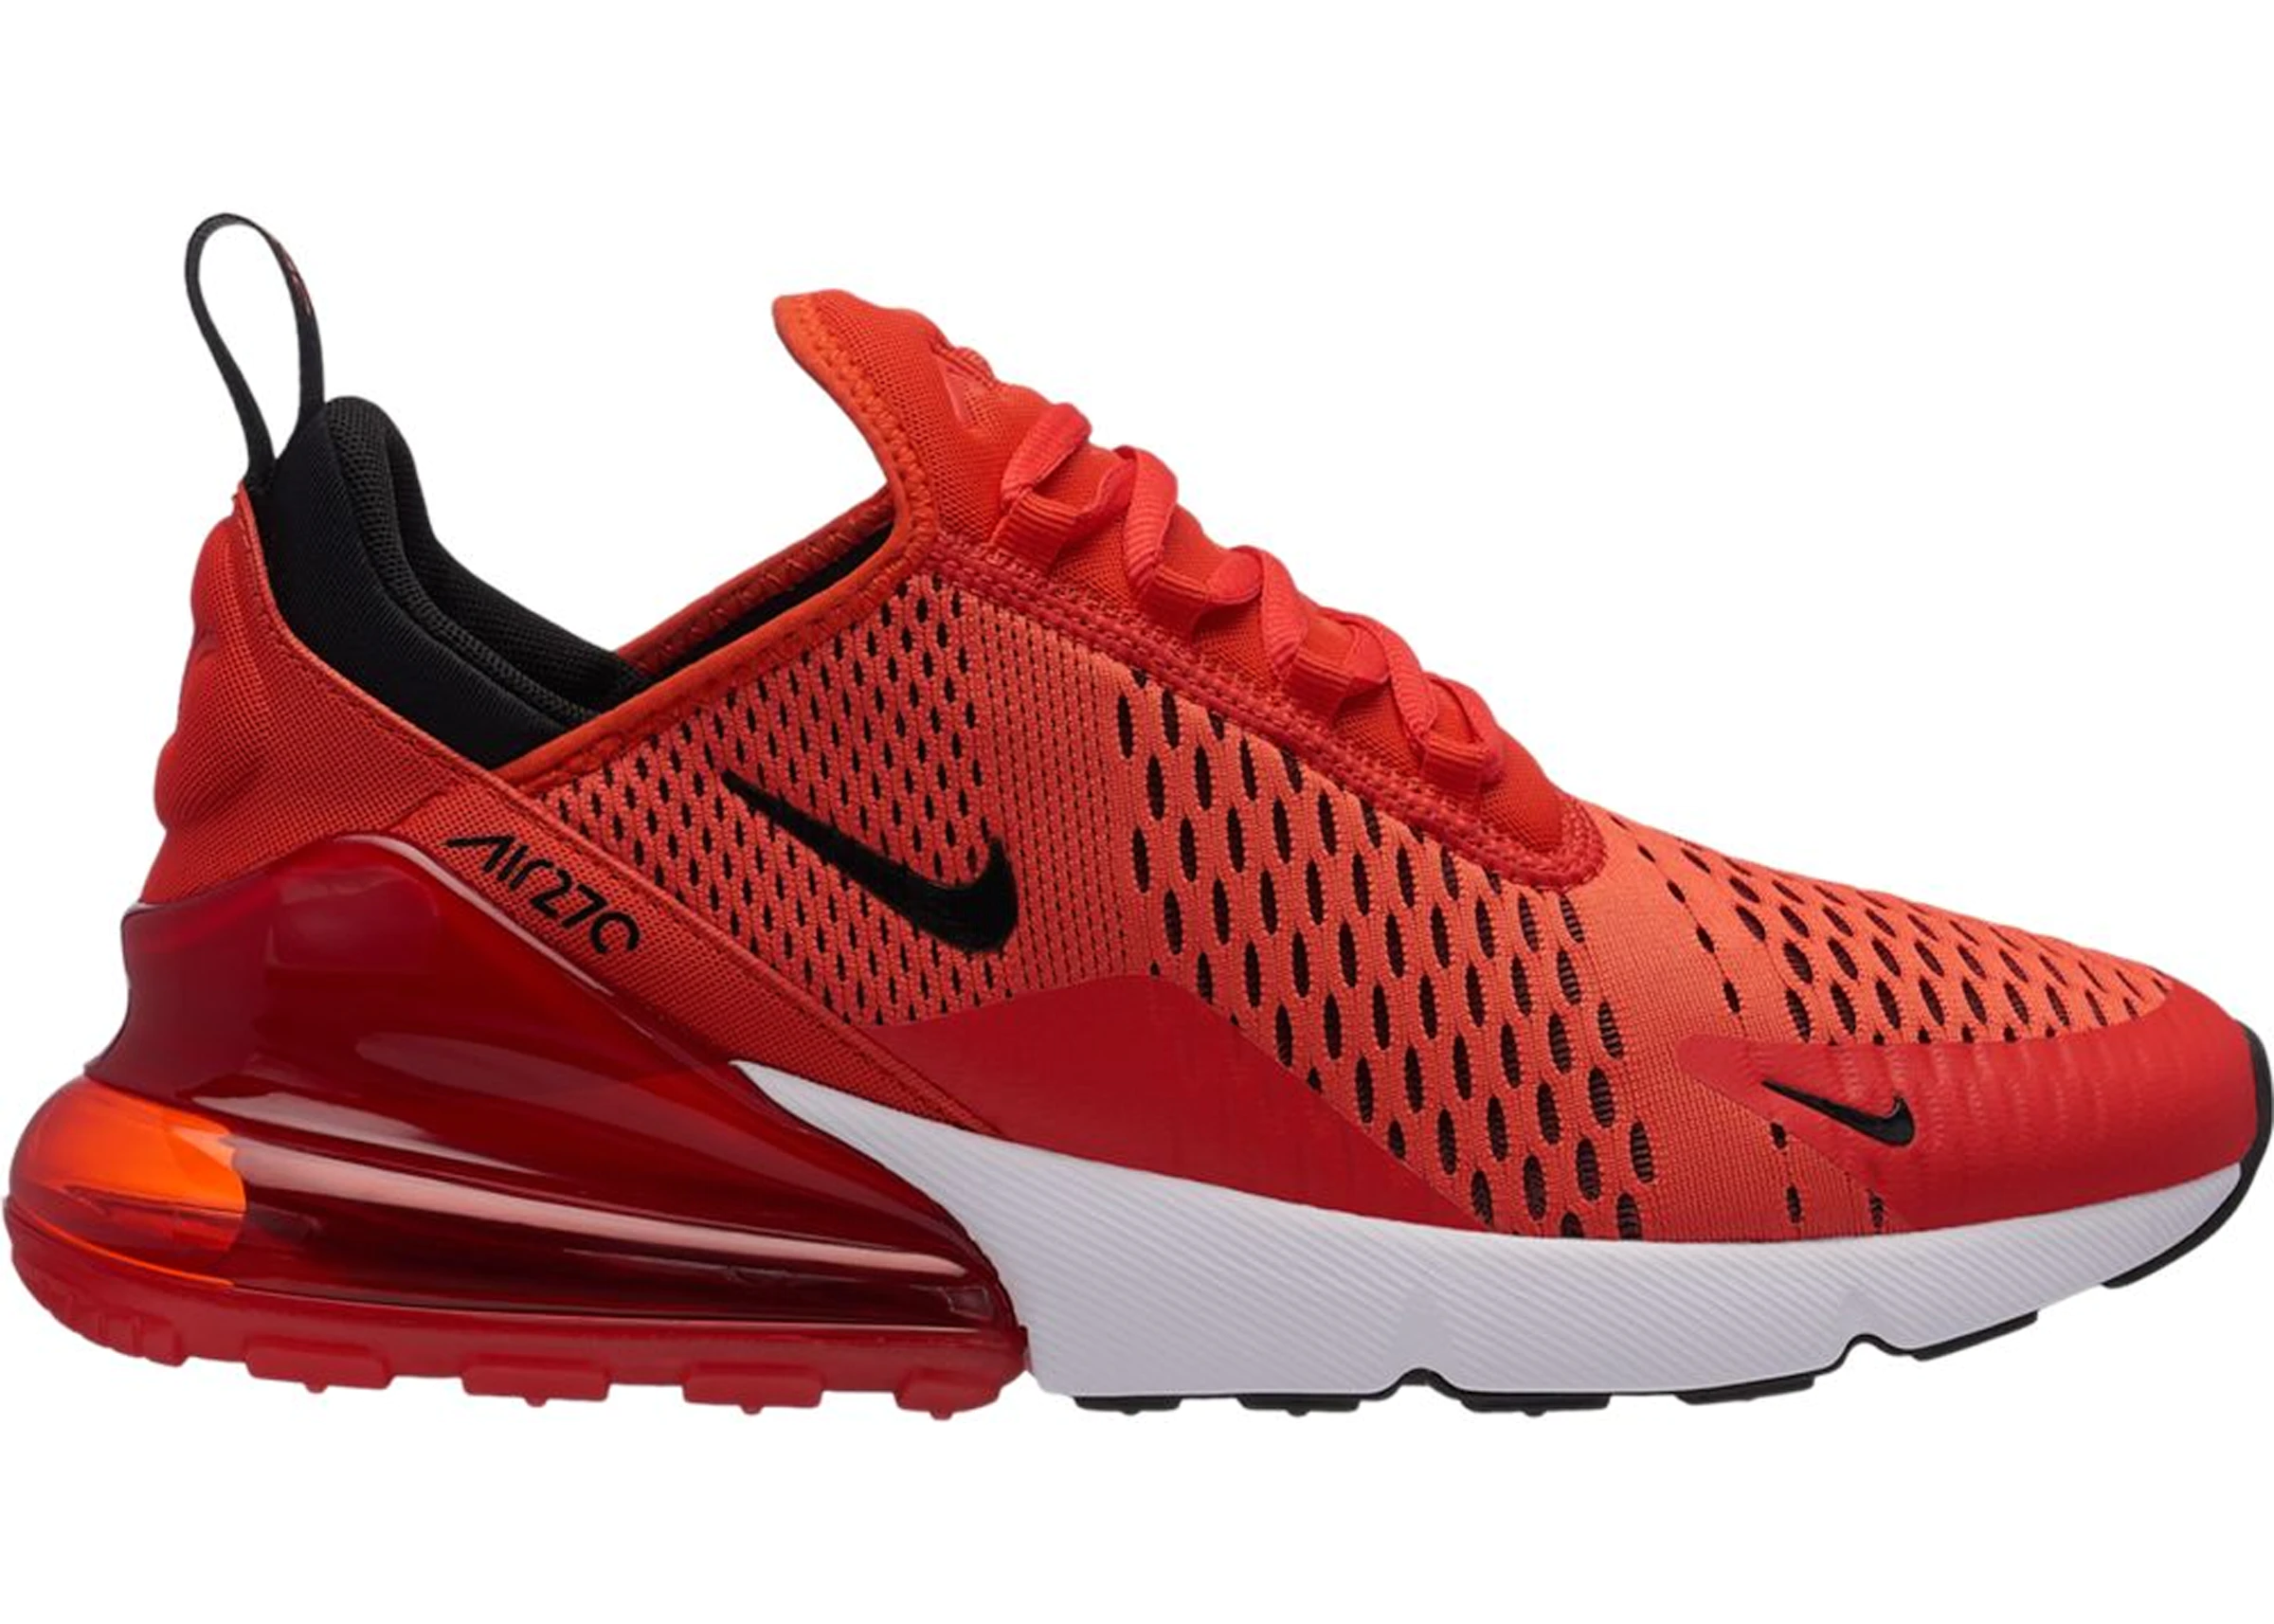 Grudge Cape Always Nike Air Max 270 Habanero Red - AH8050-601 - US